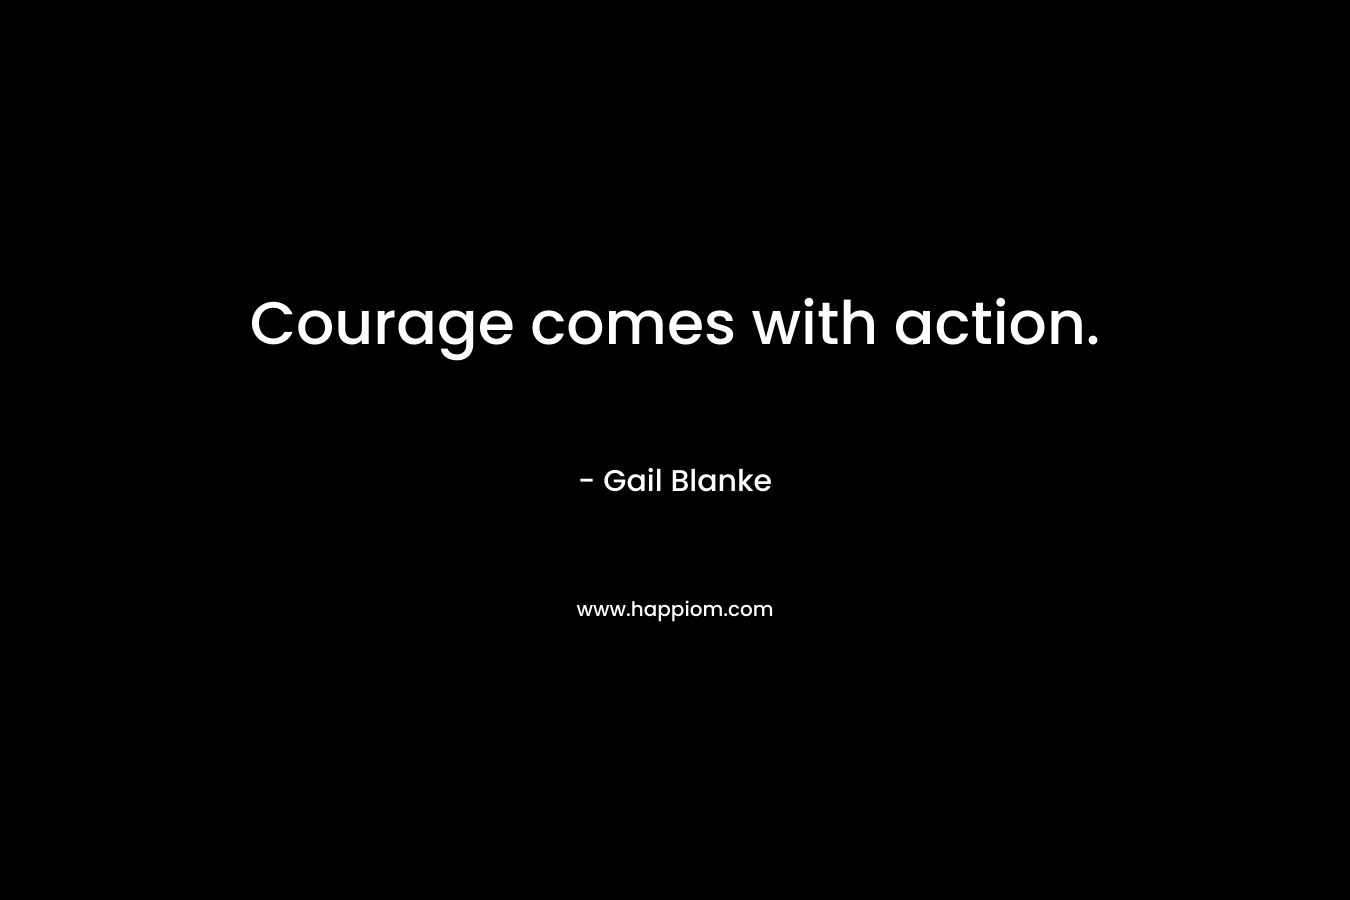 Courage comes with action.